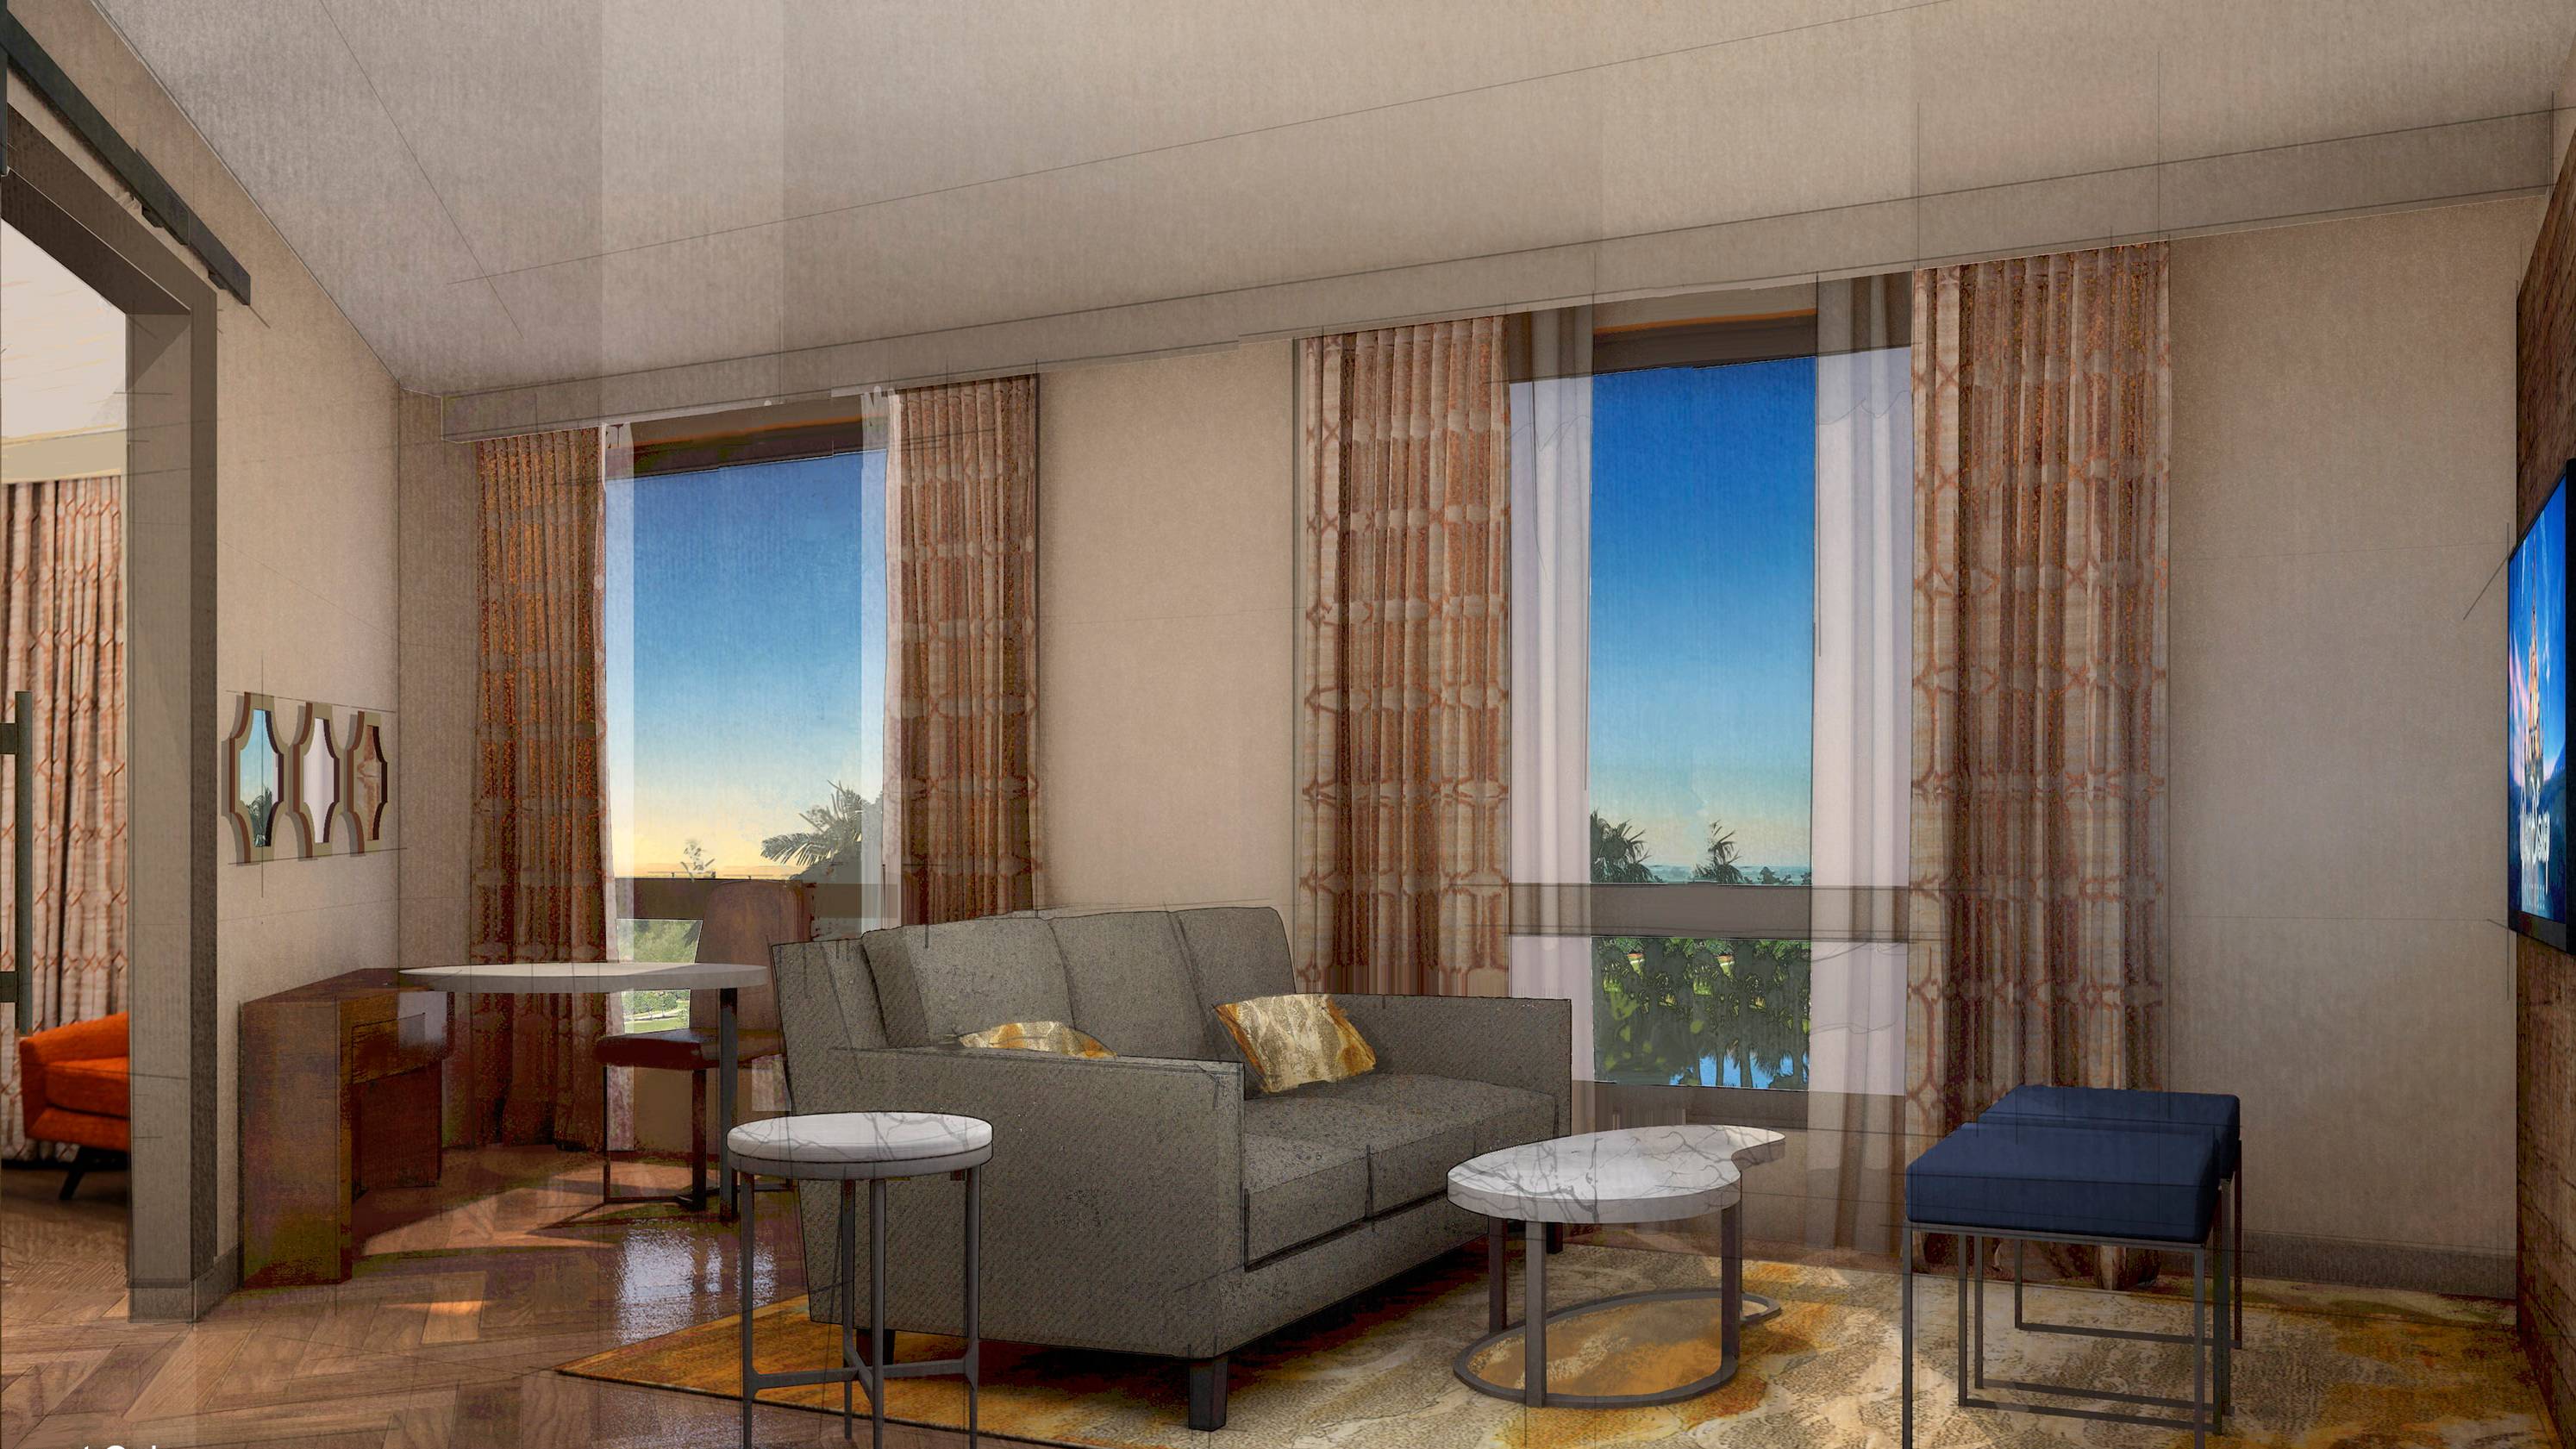 PHOTOS - Gran Destino Tower room and suite concept art, and reservations now open